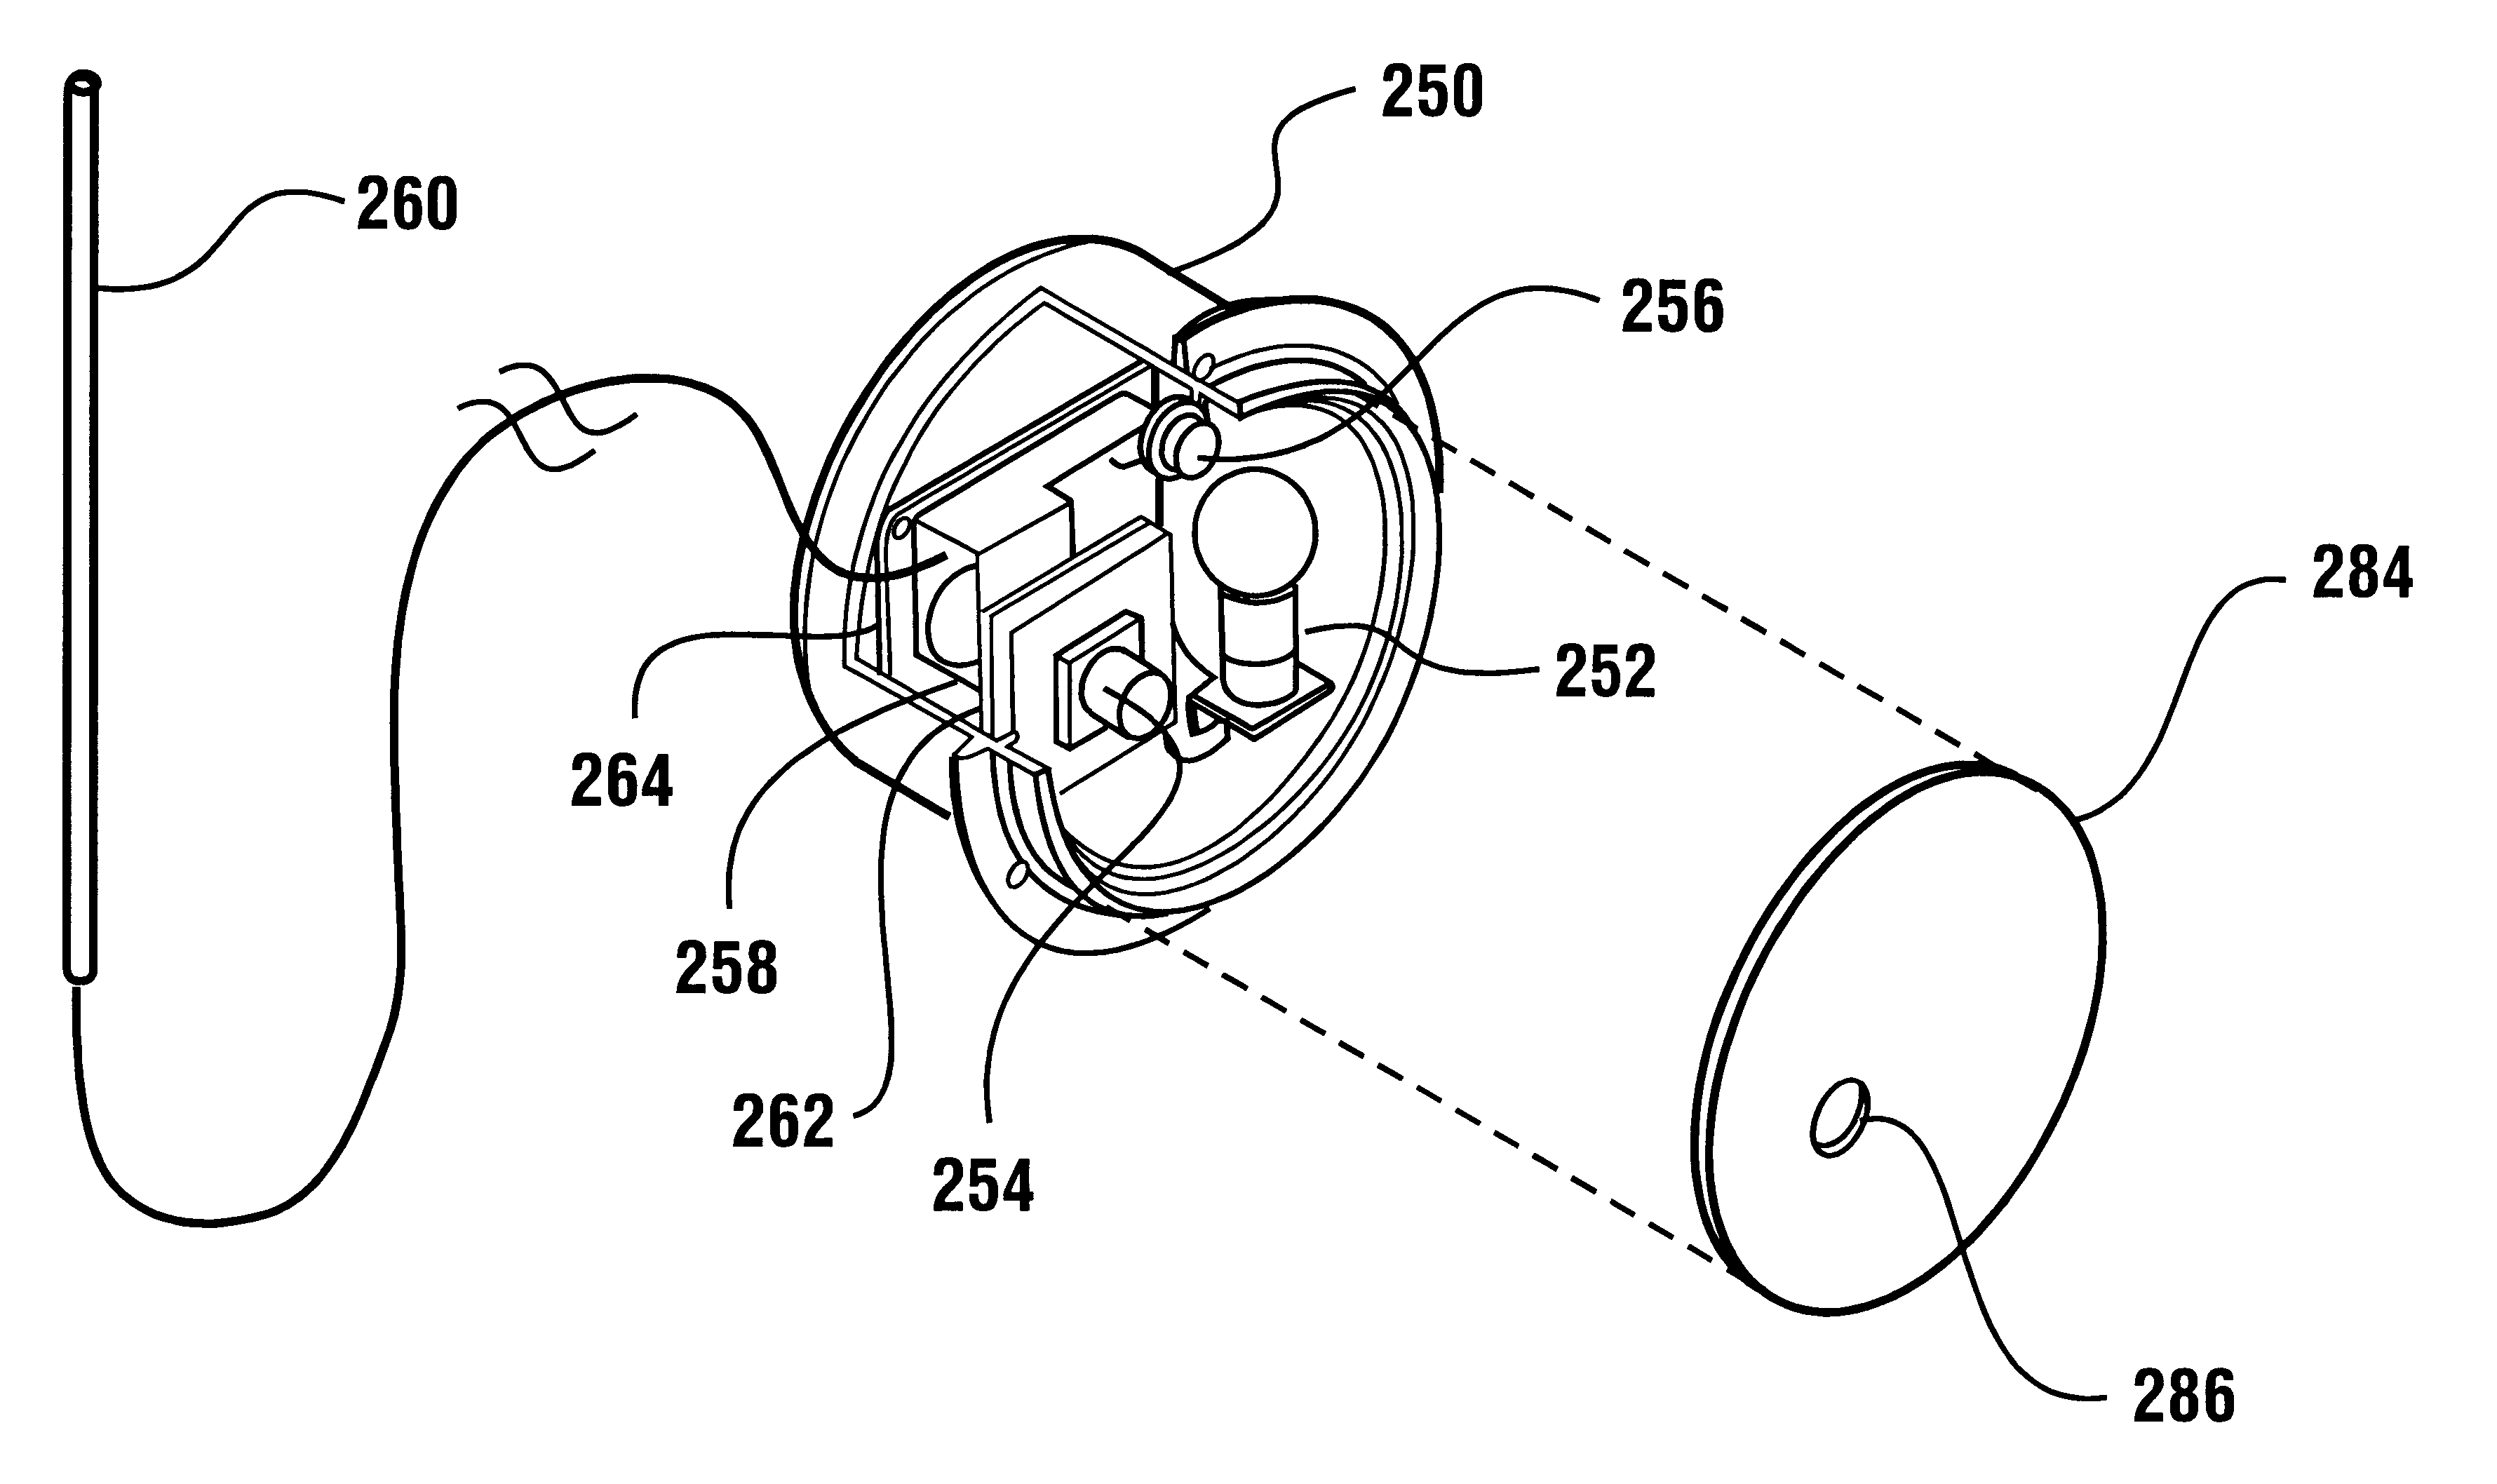 Video and audio transmission apparatus for vehicle surveillance system